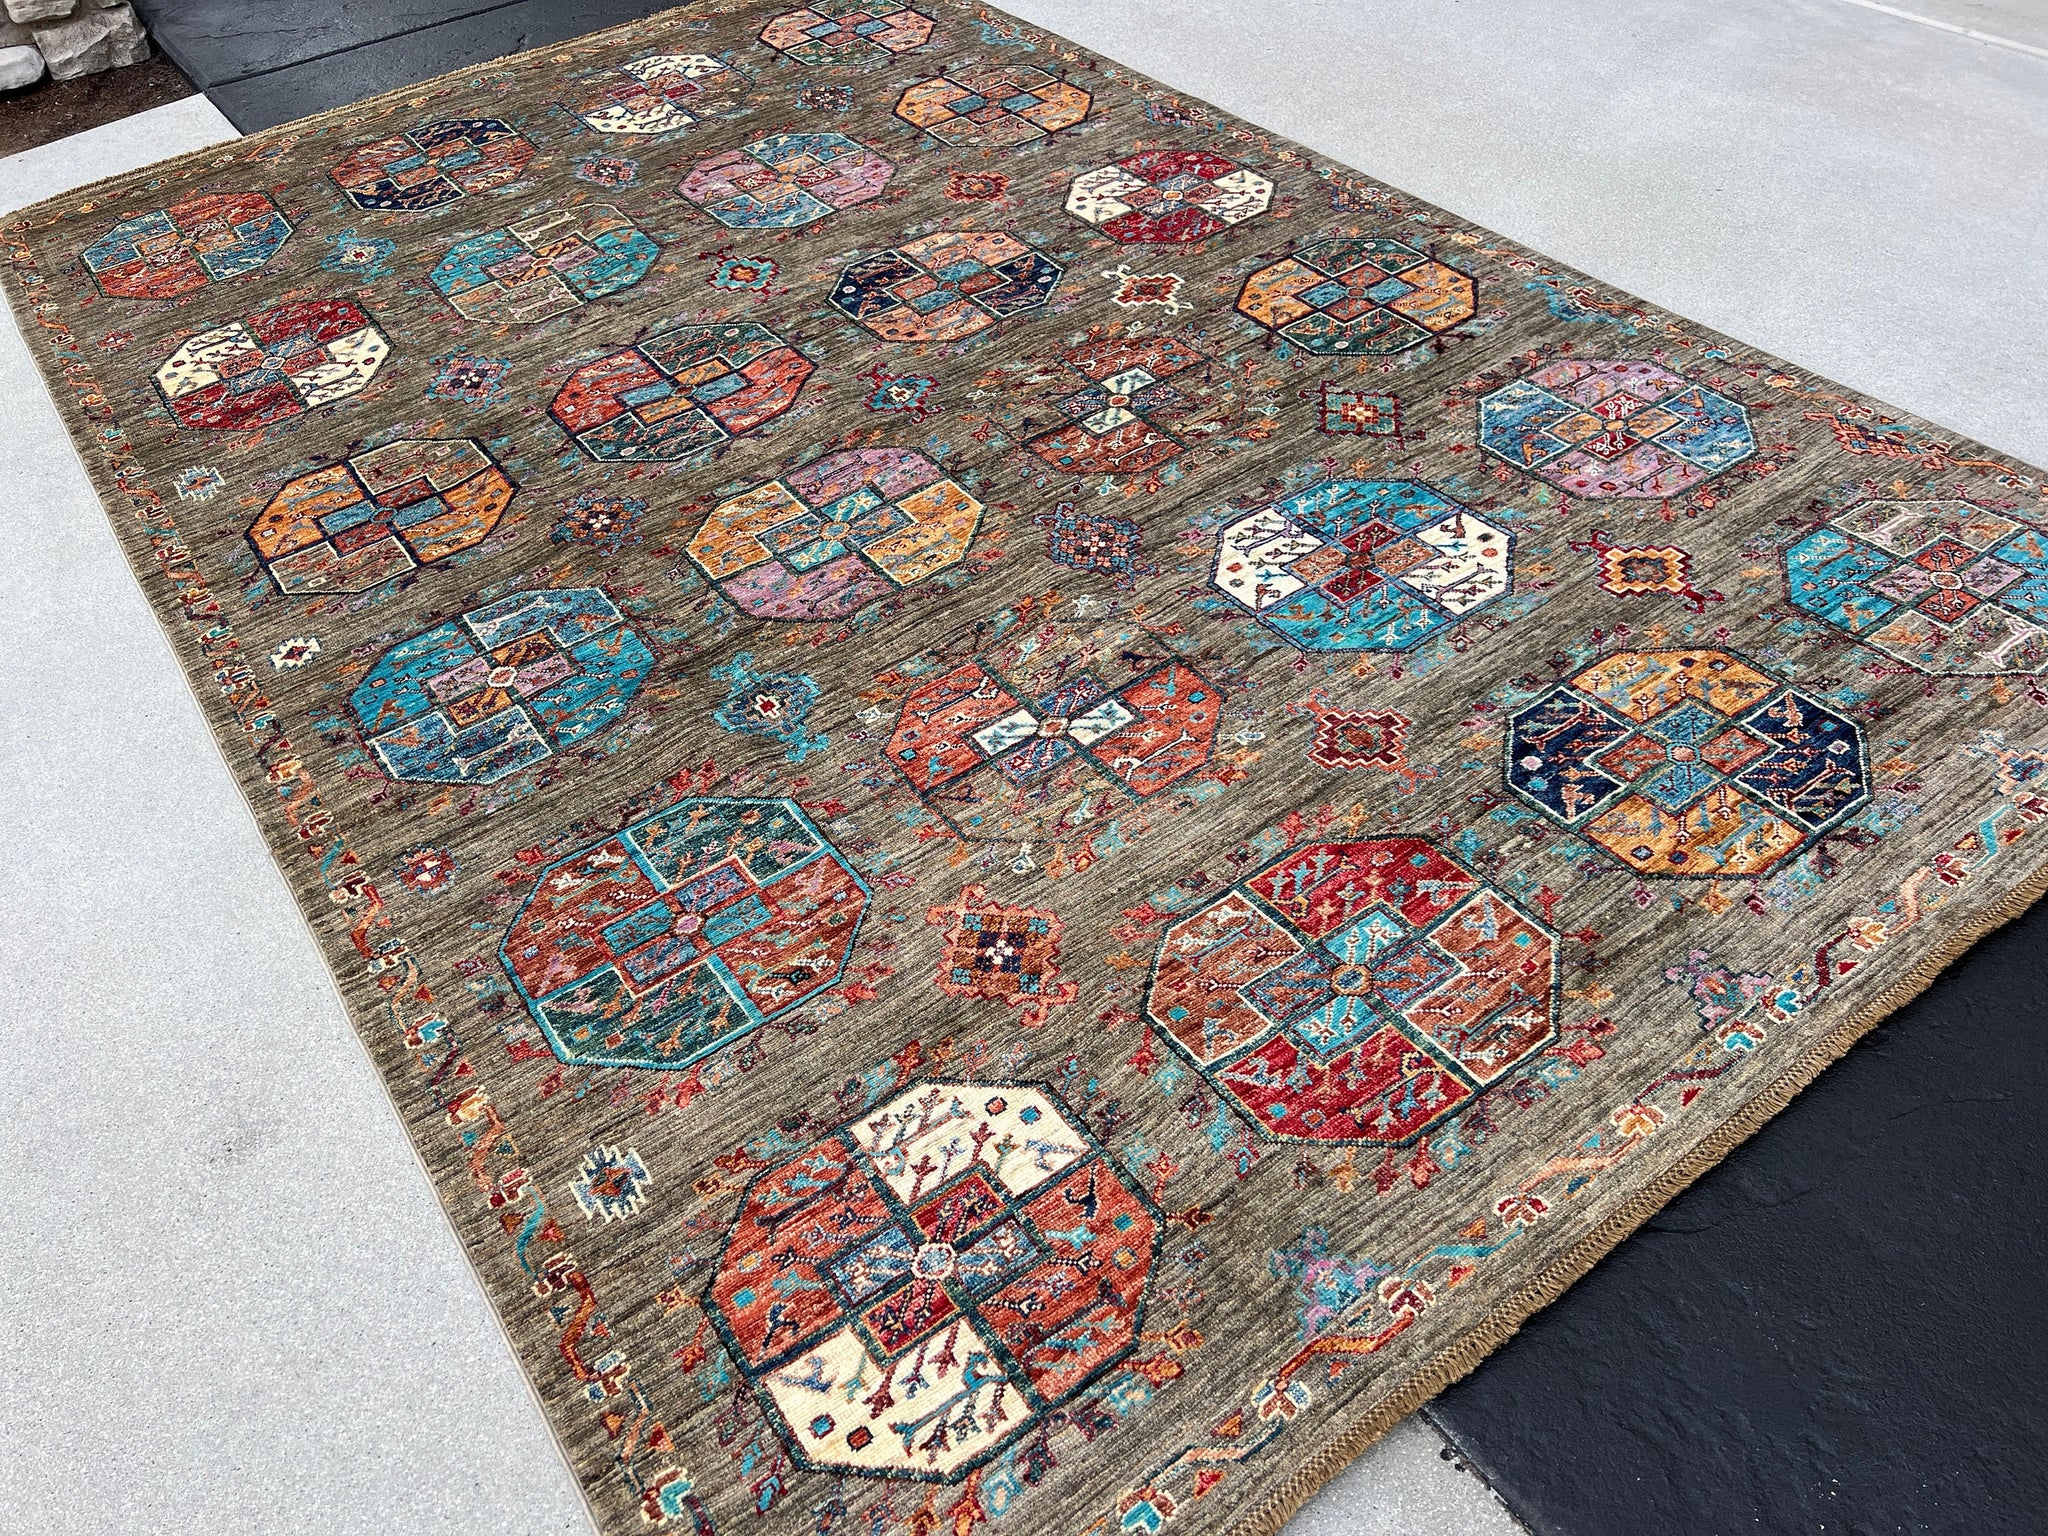 6x9 Fair Trade Handmade Afghan Rug | Charcoal Grey Coral Burnt Orange Pink Midnight Baby Blue Blood Wine Red Yellow Ivory Copper Brown Boho